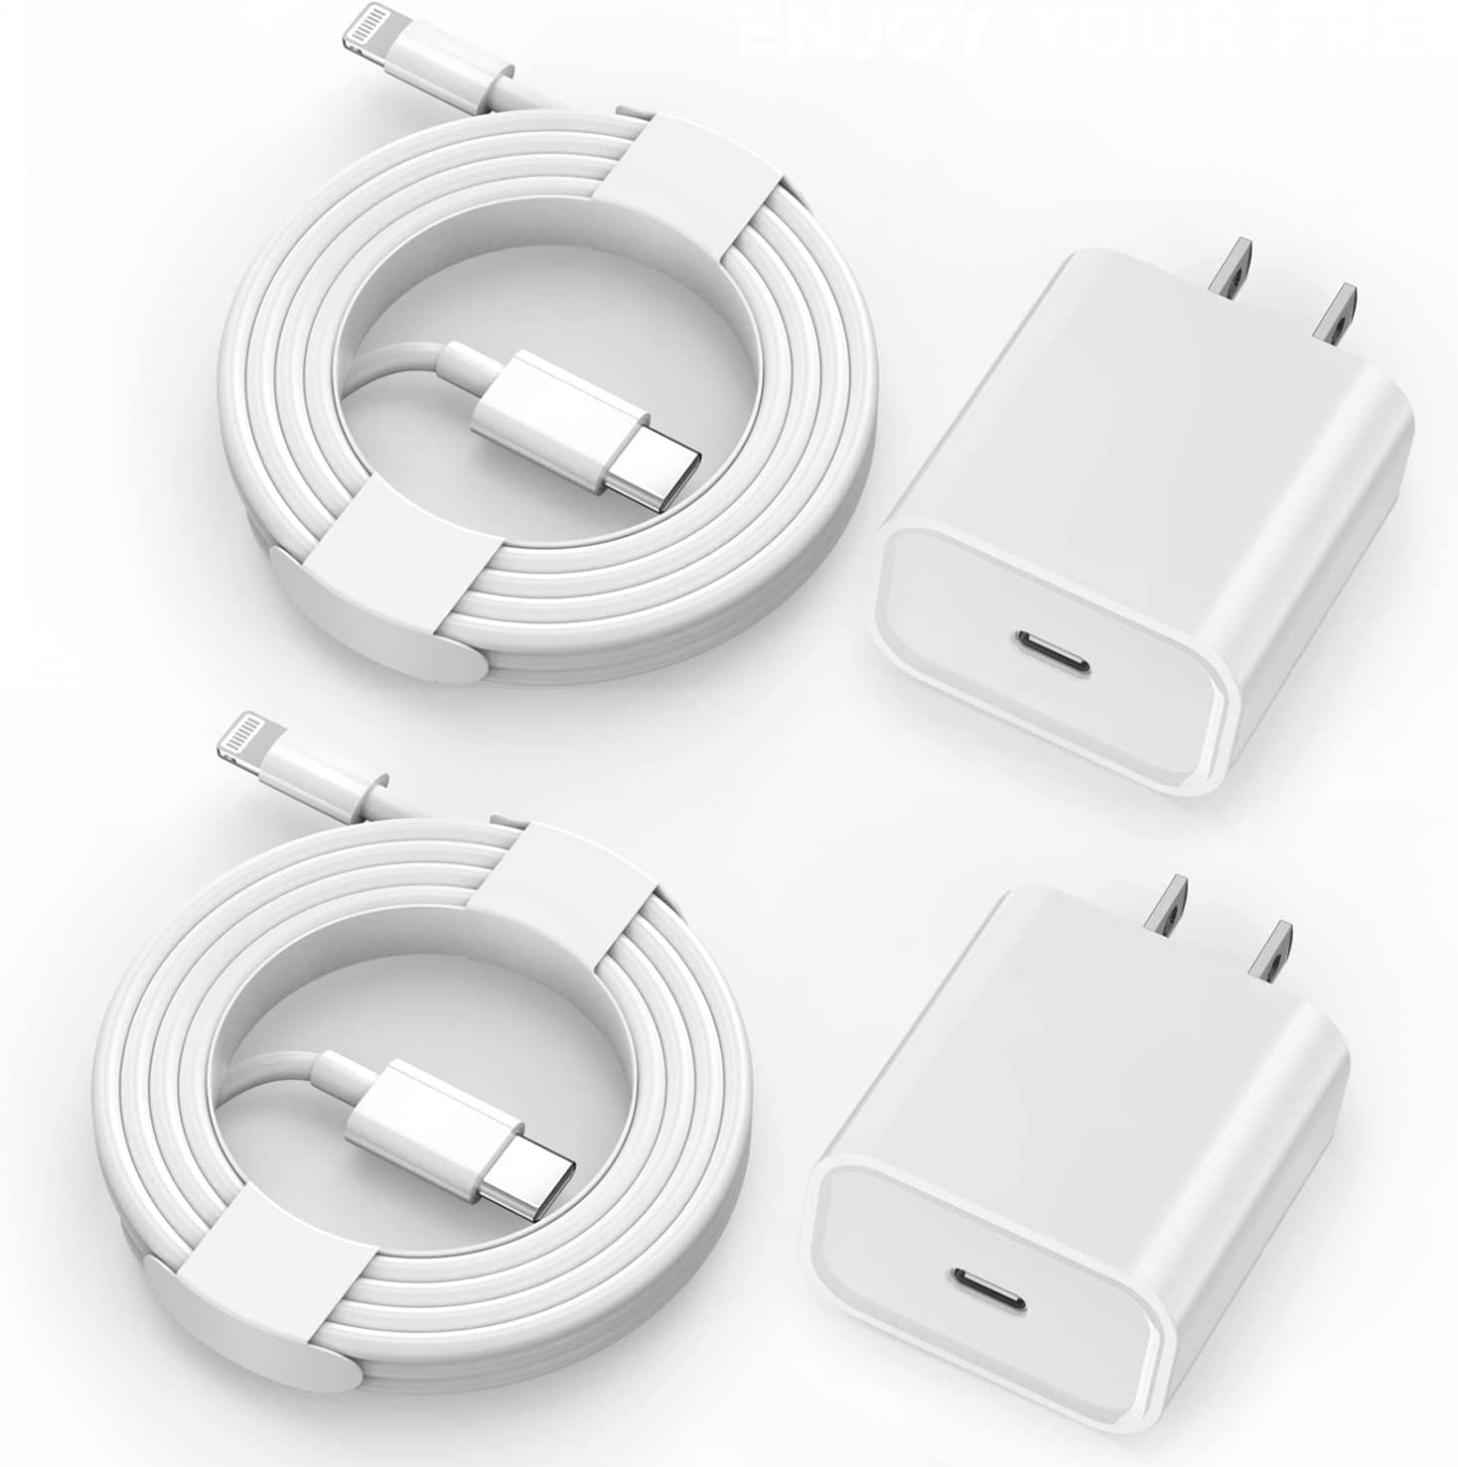 Fast Charger iPhone,Fast Apple Charger iPhone【Apple MFi Certified】2Pack USB C Wall Charger Fast iPhone Charger 6FT Type-C USB C to Lightning Cables for iPhone 14/13/12/11 Pro Max,Mini,8, iPad/AirPods